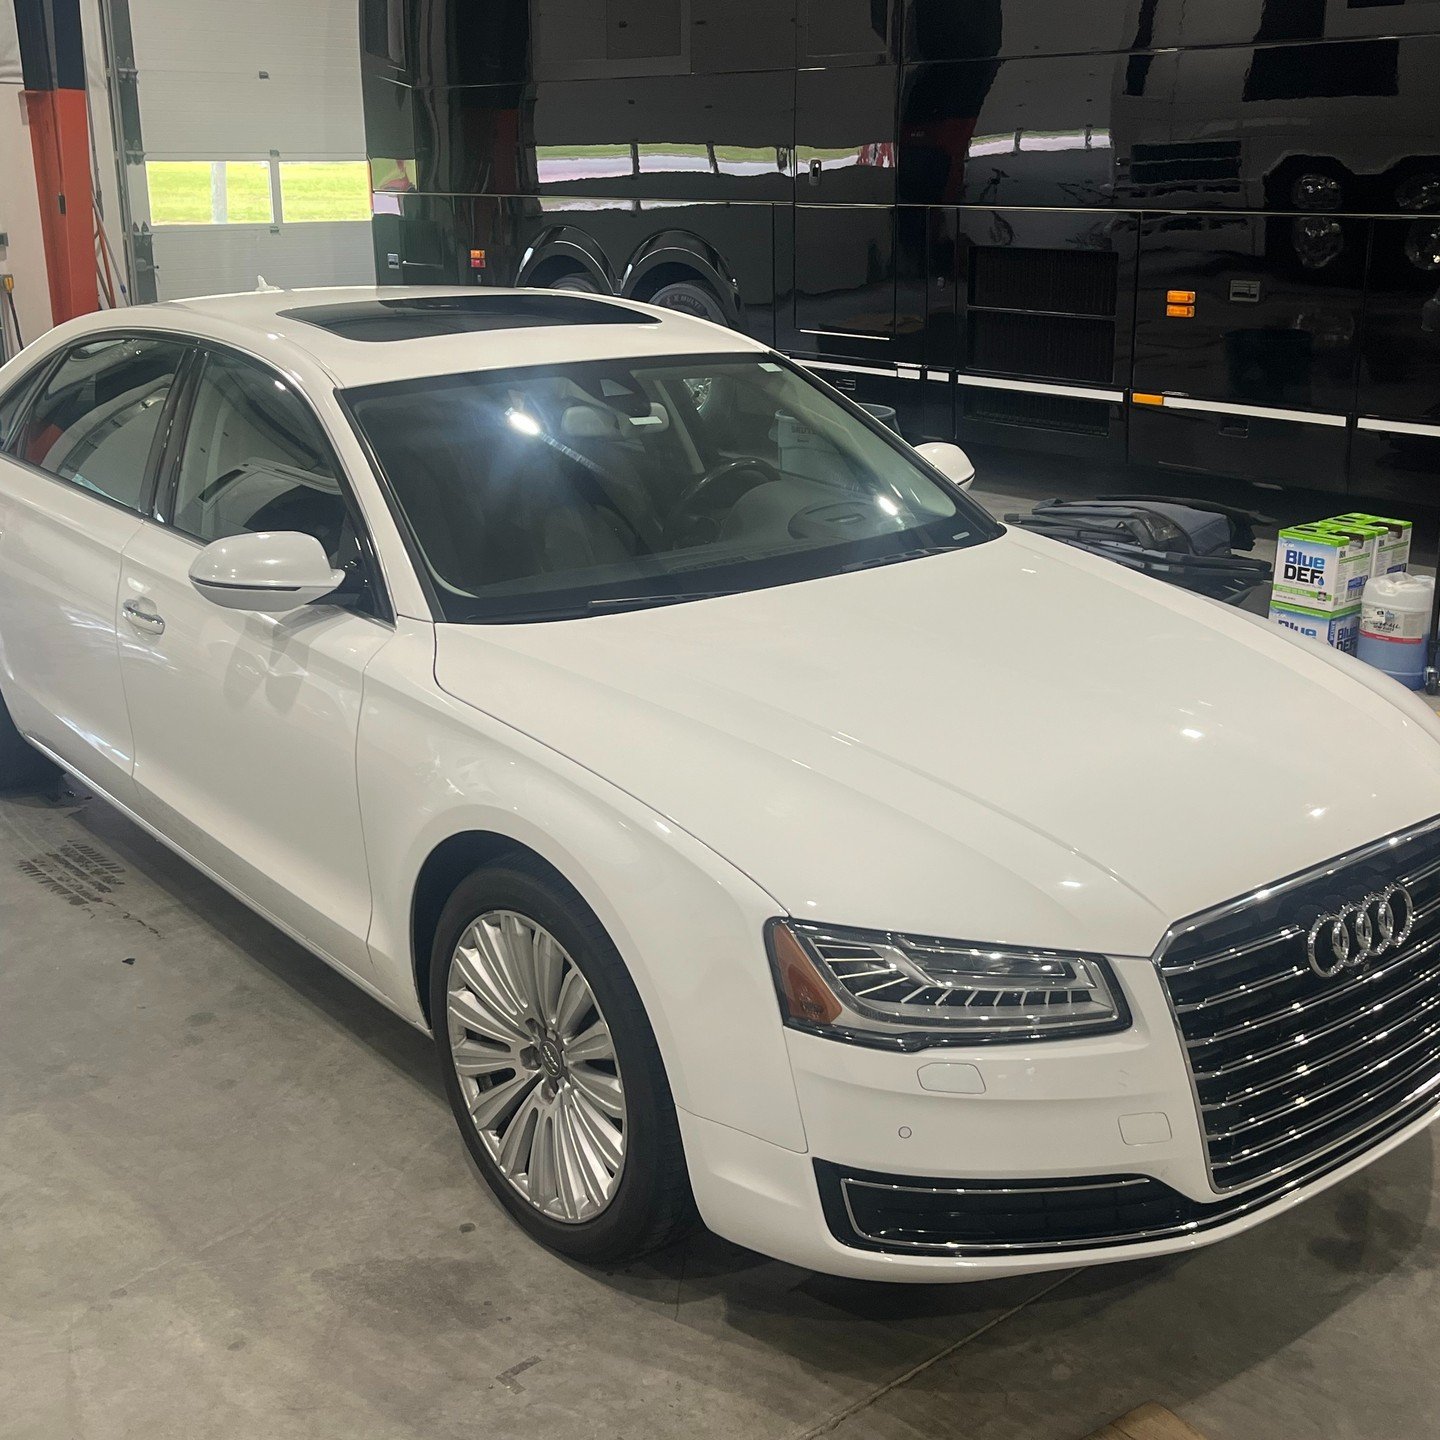 2015 Audi A8 L3.0T 
97,000
18,895.00
Clean Carfax
Full option A8L
AM/FM/XM Stereo/GPS/Info Center
Sun Roof
Two side and rear window shades (auto)
Rear Seat Center Console
No door or panel dings
No front valance curb damage
2022 New Brakes
2023 Front 